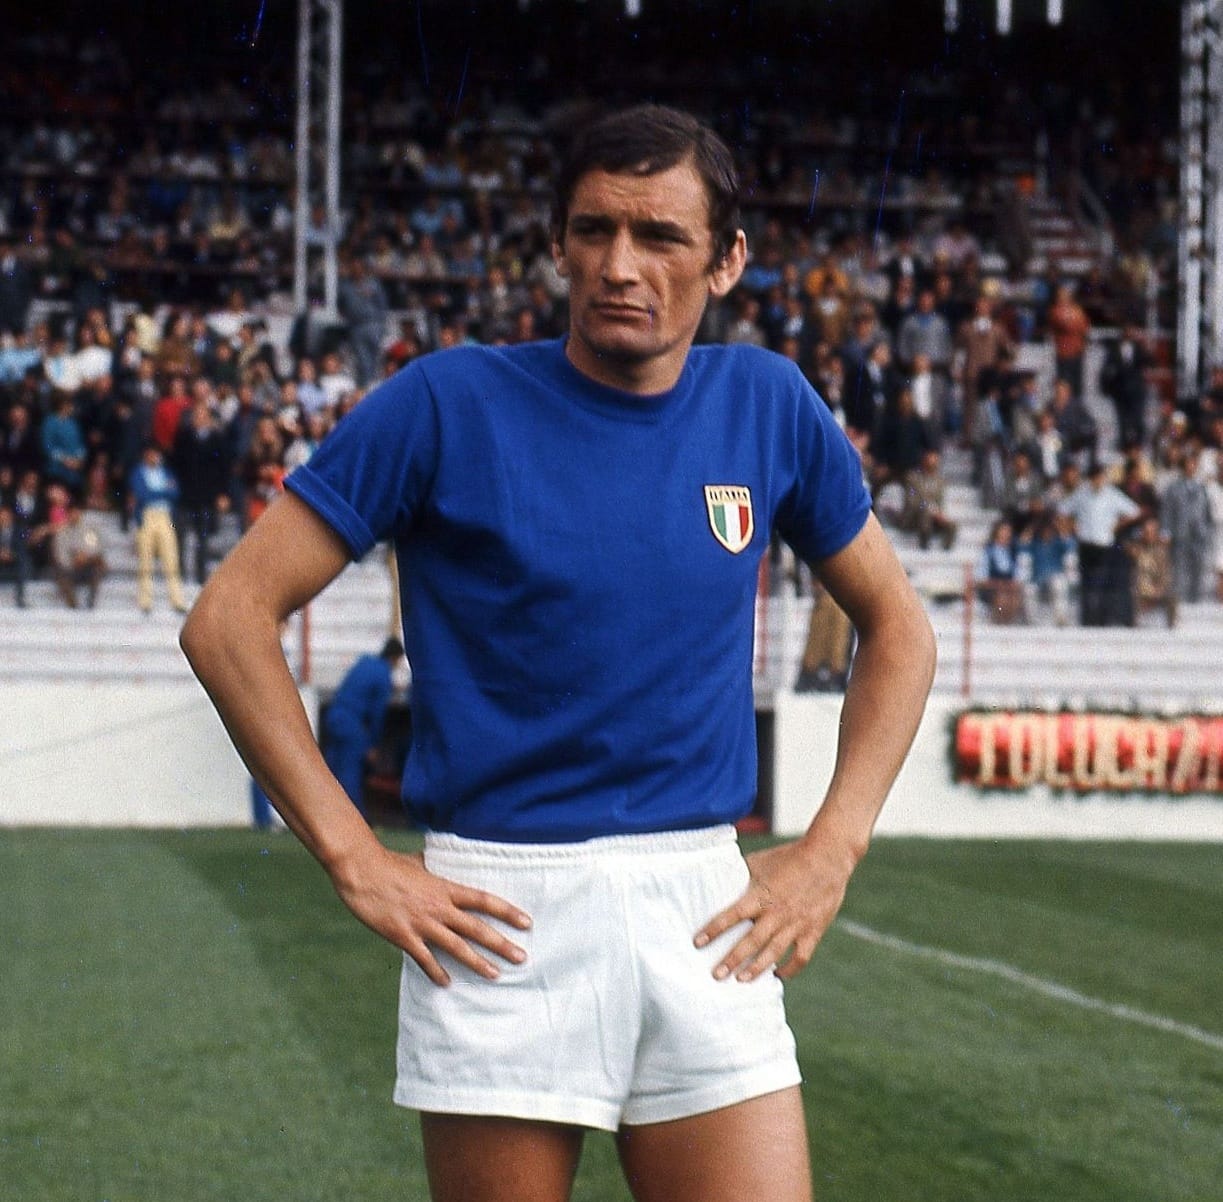 luigi-riva-of-italy-poses-for-photo-during-the-1970-world-cup